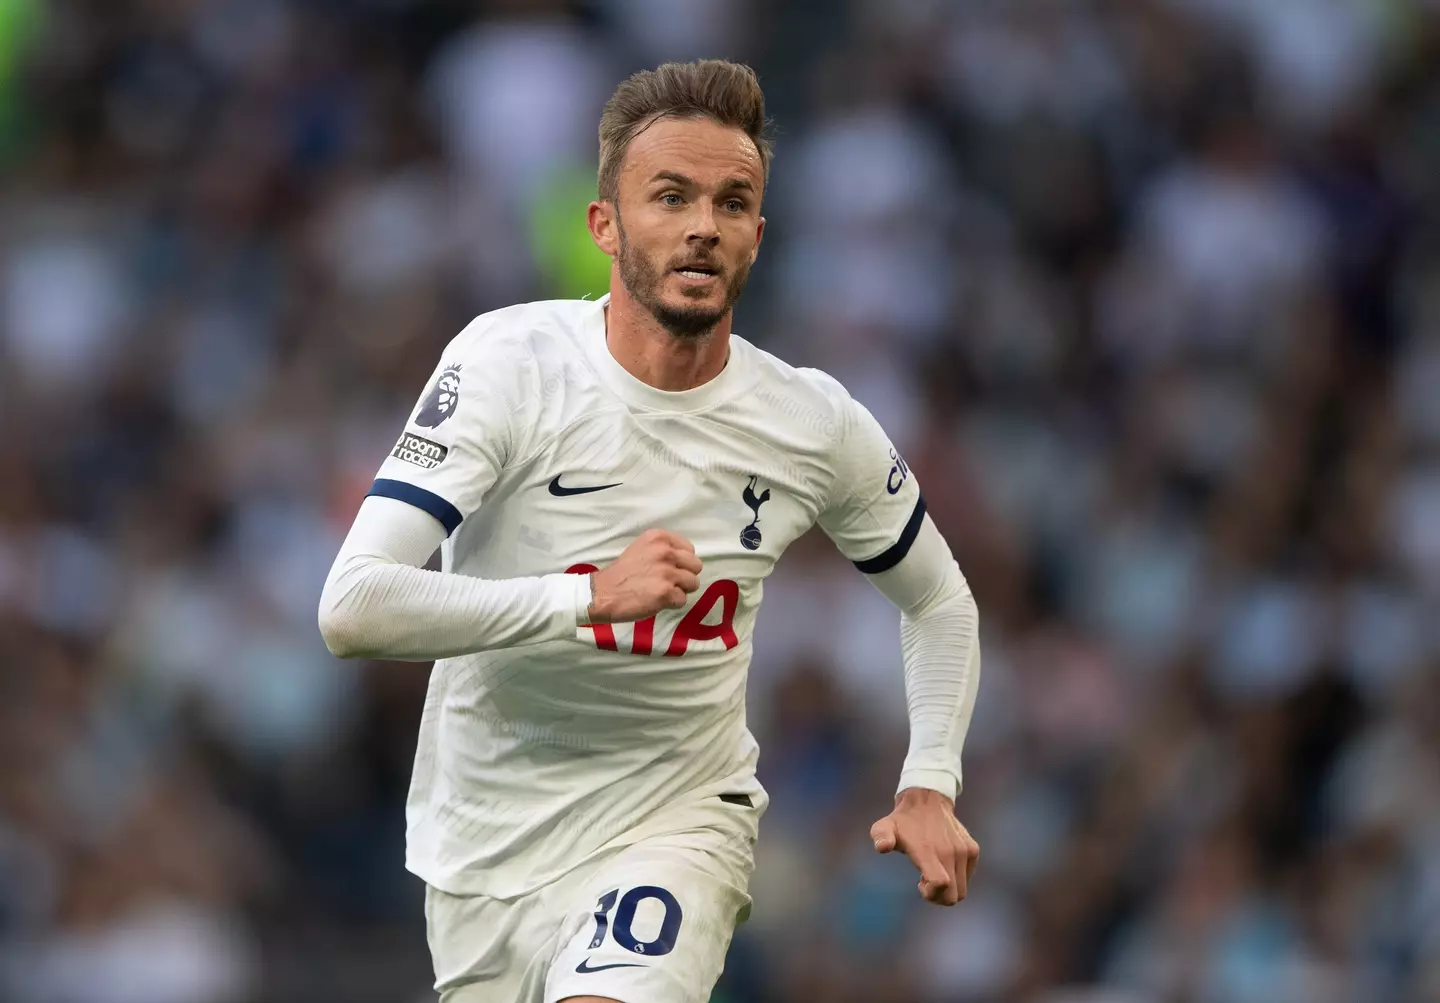 James Maddison has started life positively at Spurs. (